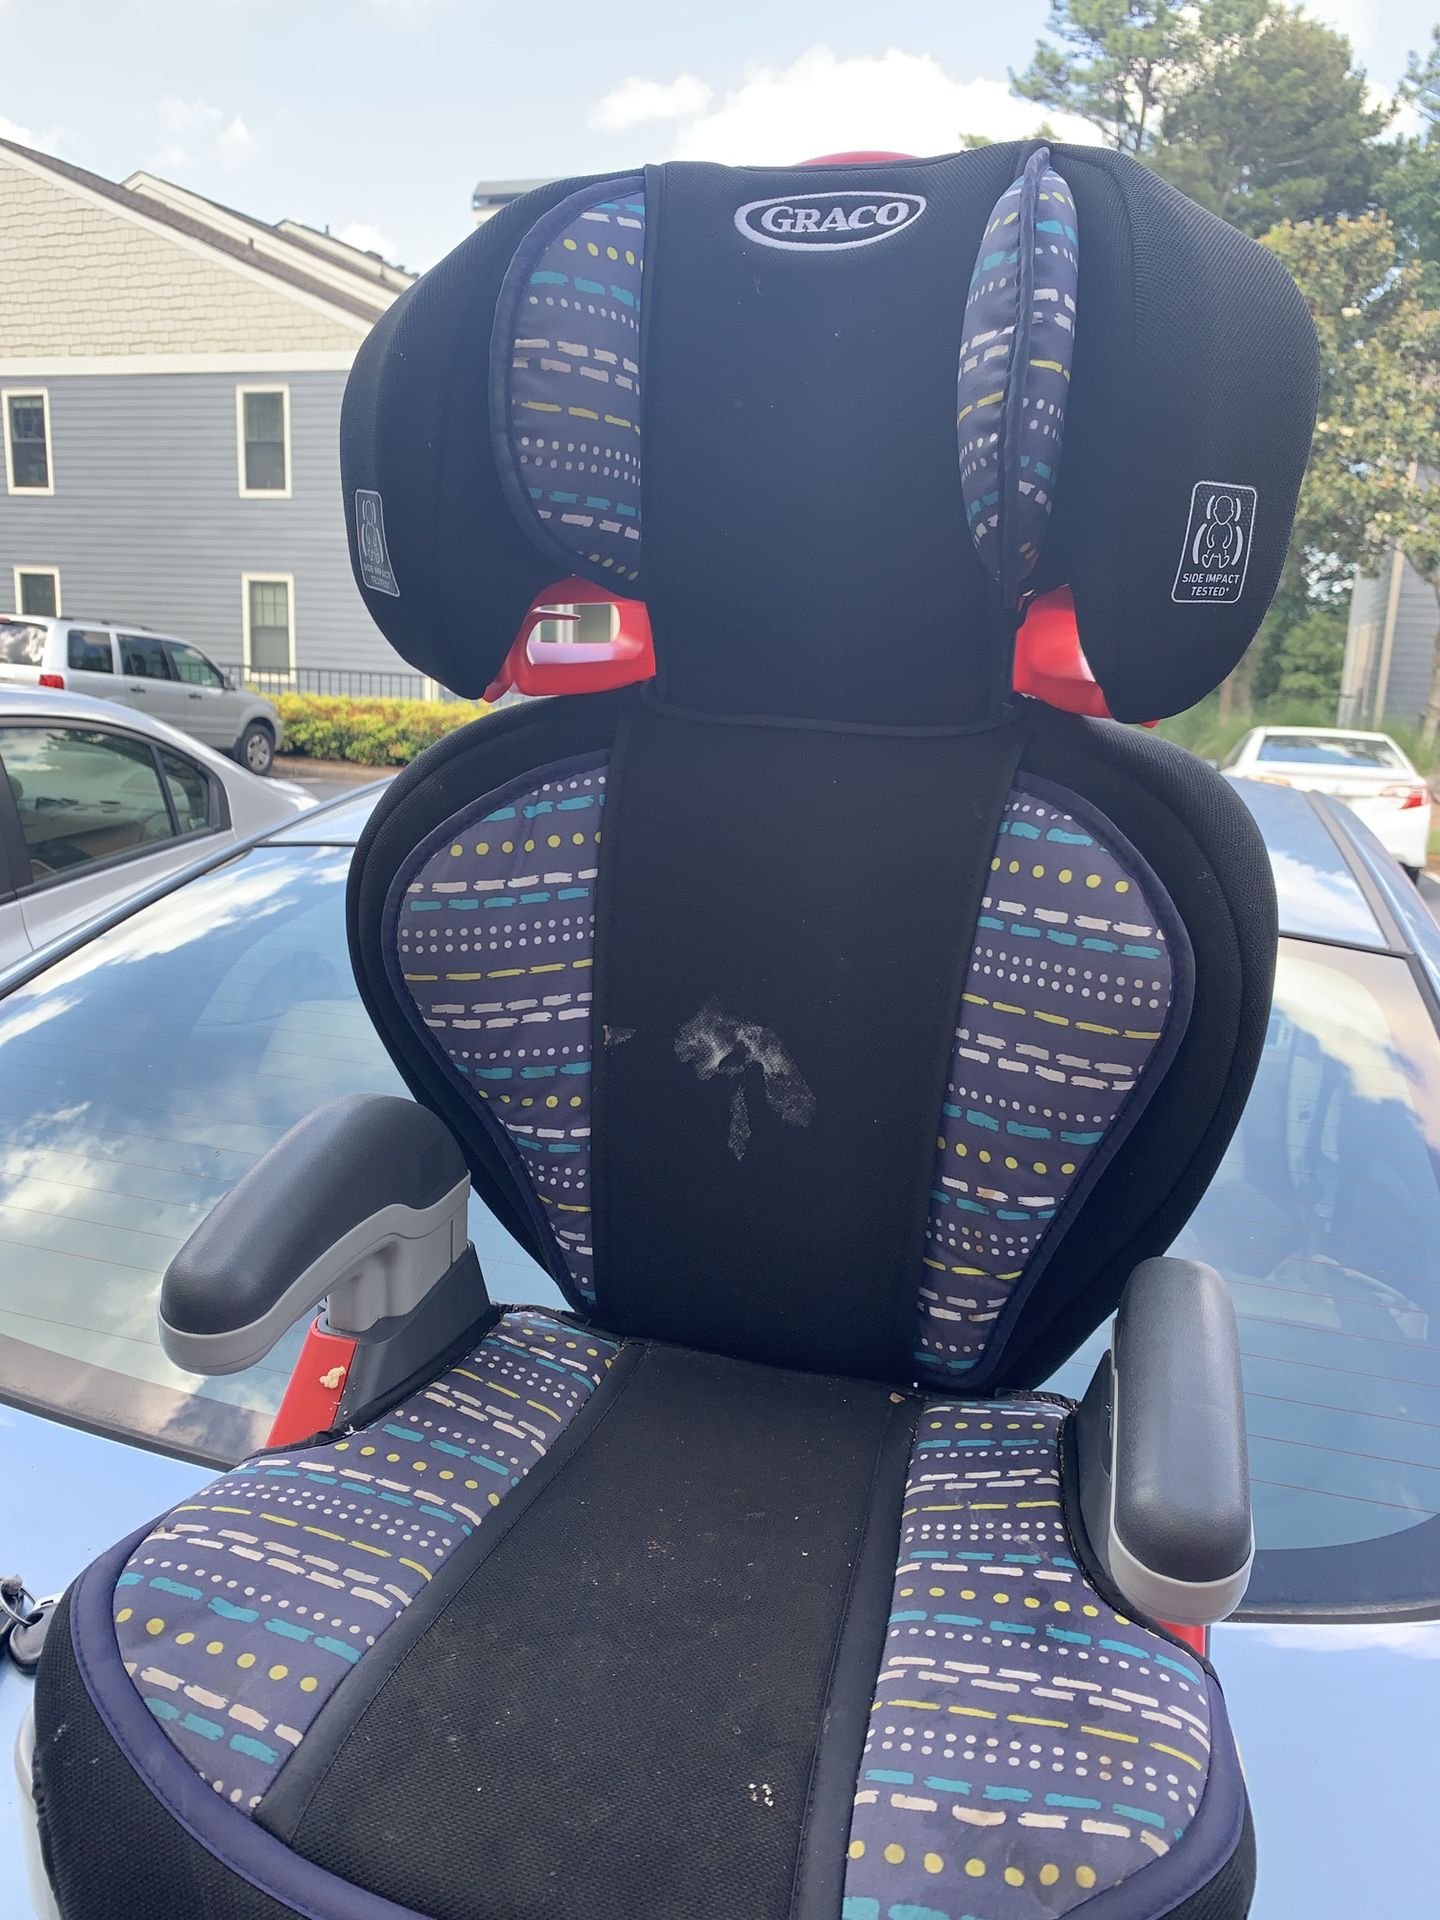 Graco TurboBooster Highback Booster Car Seat